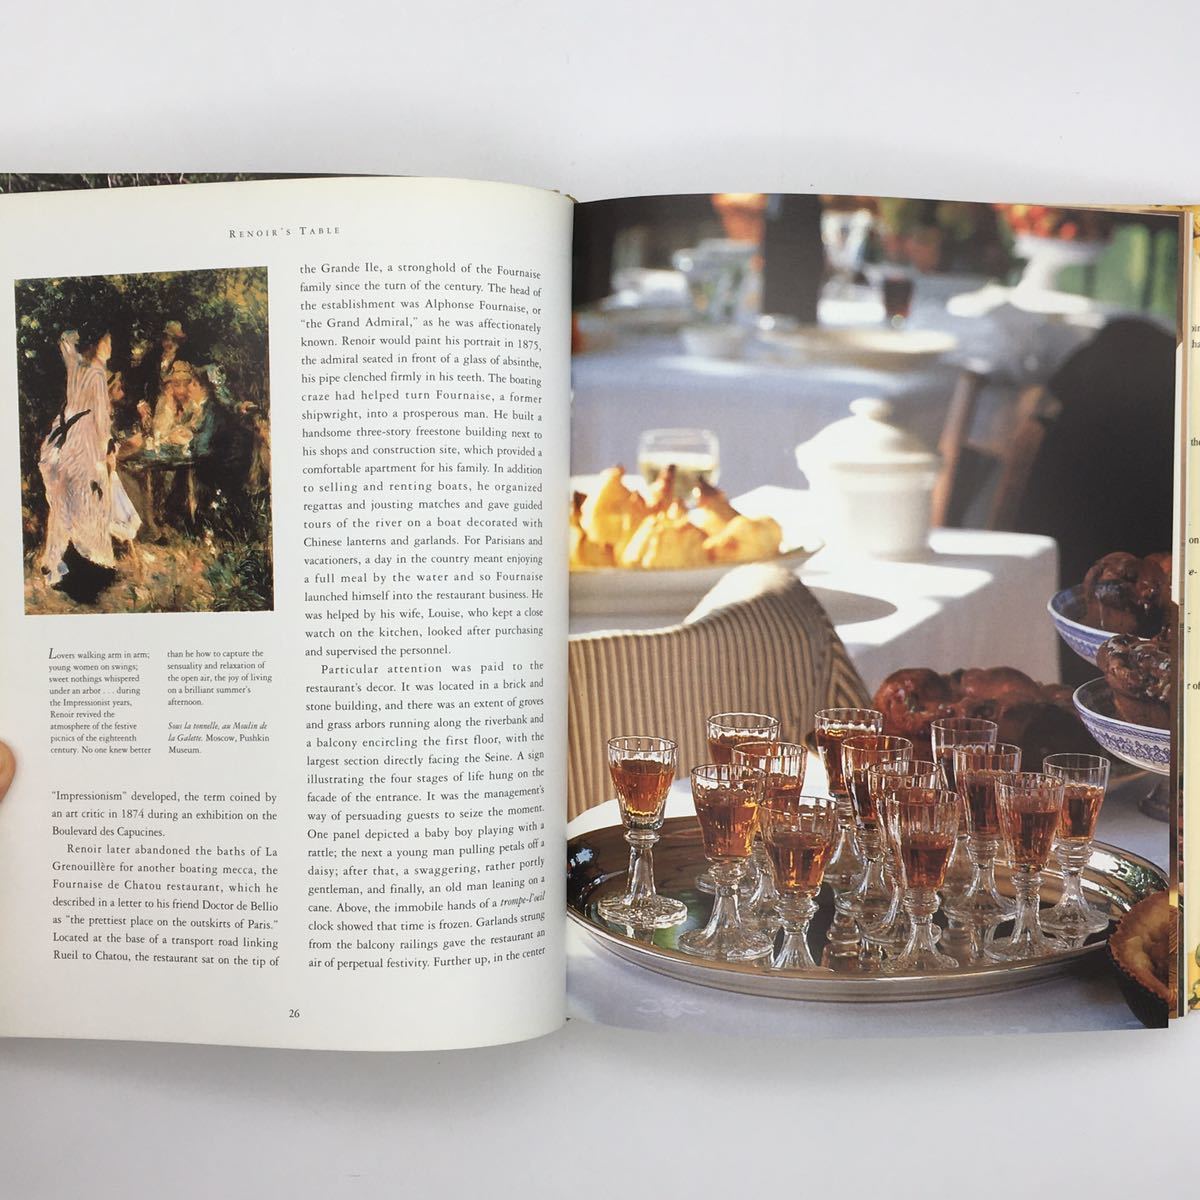 [ foreign book ]ru noire. dining table [RENOIR\'S TABLE] 1994runowa-ru. picture, photograph, recipe 